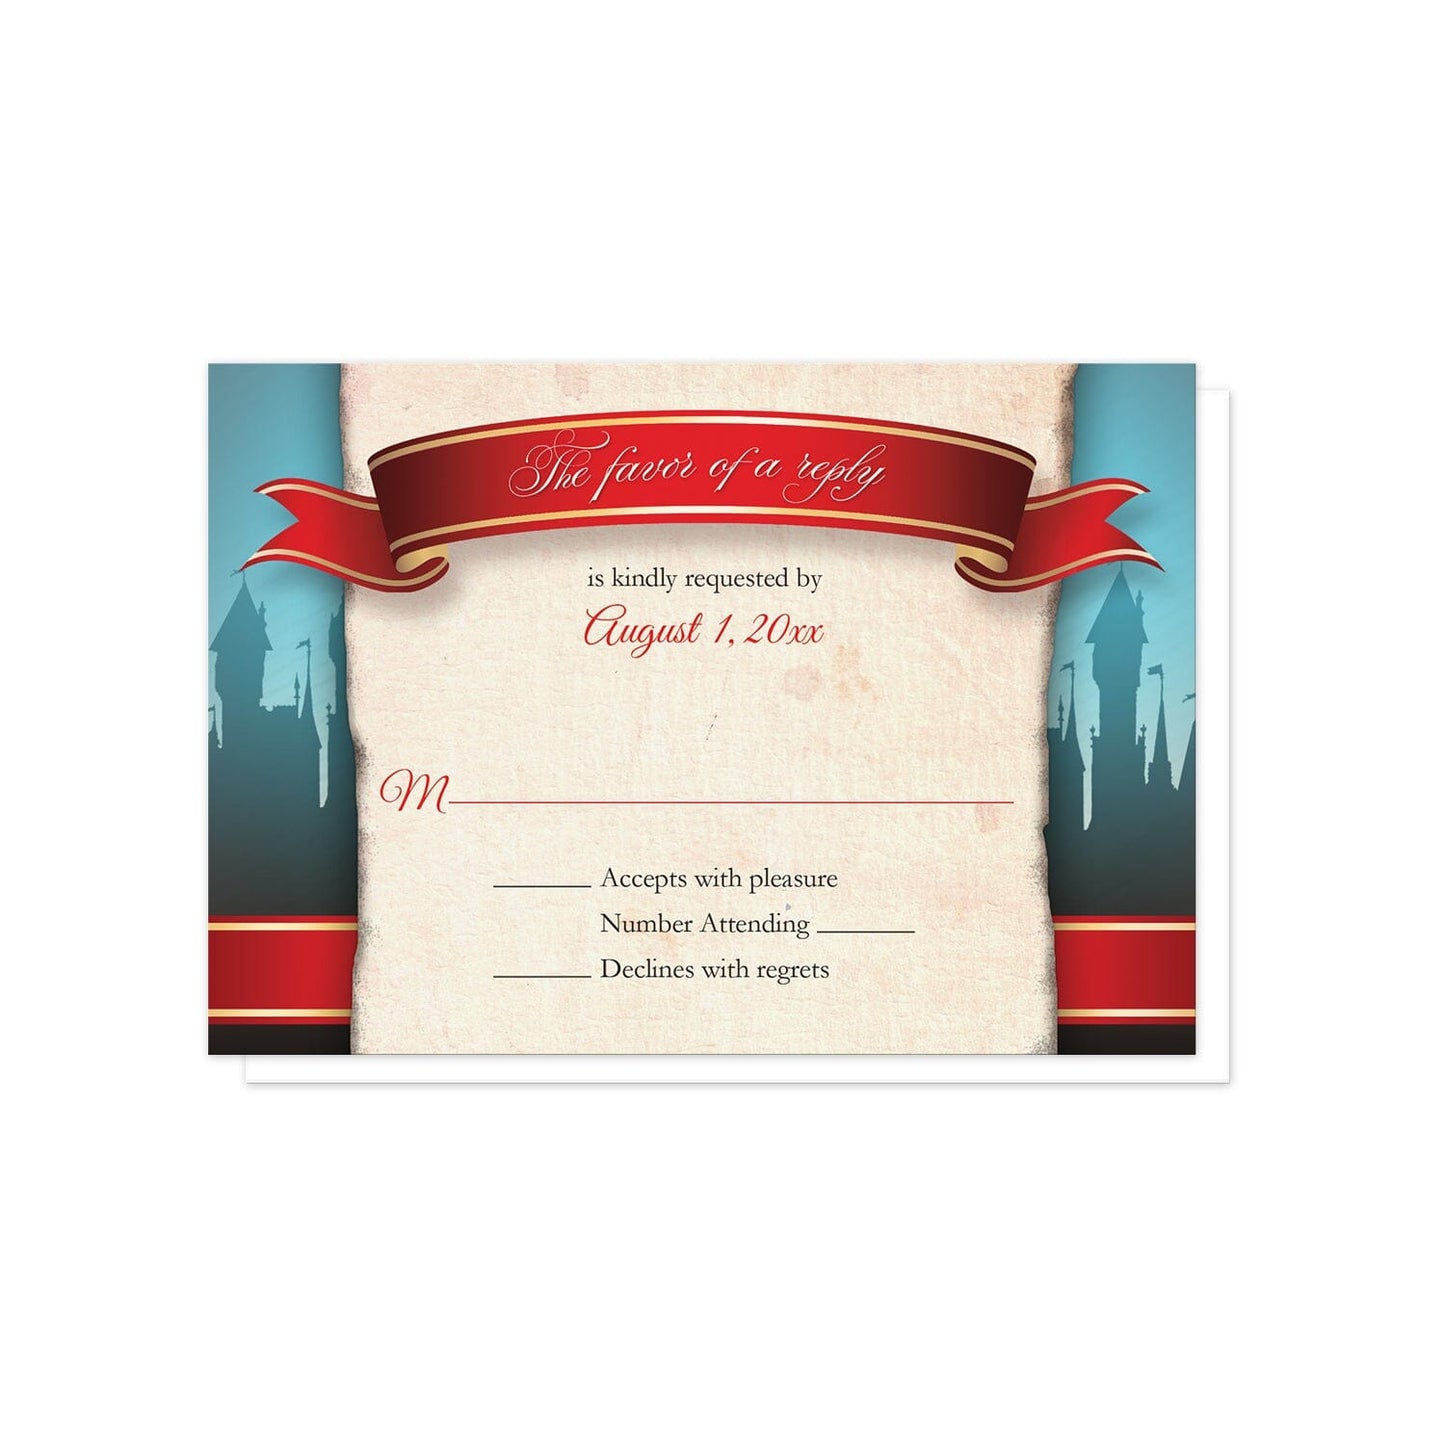 Fairytale Castle Red Once Upon a Time RSVP Cards at Artistically Invited.